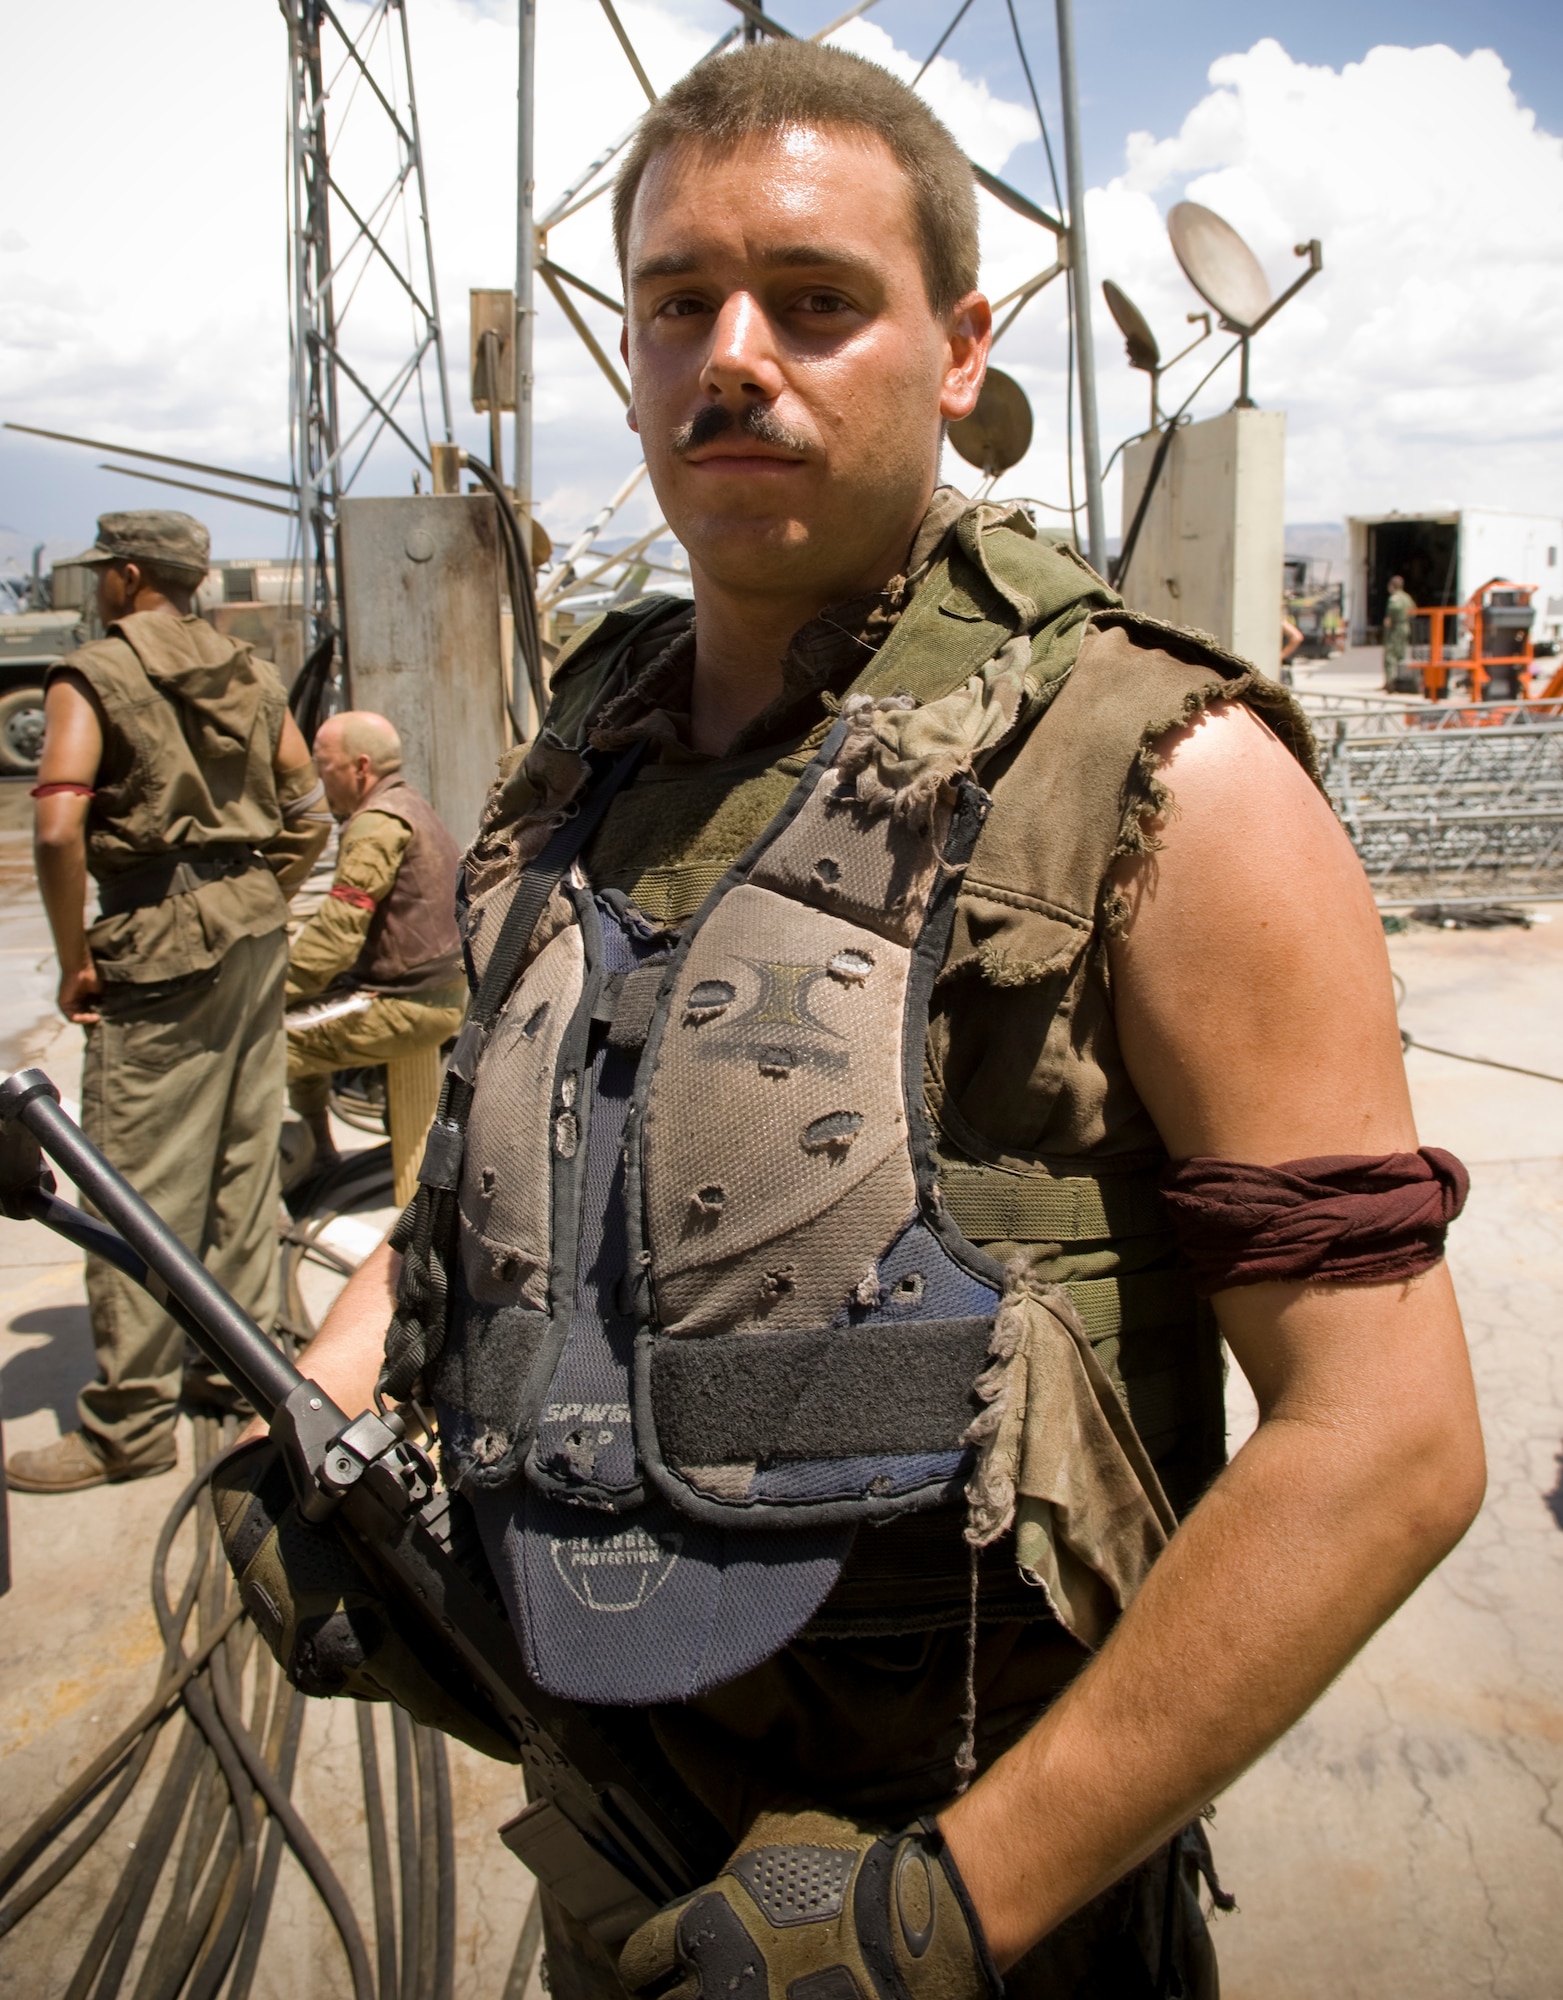 Senior Airman, Kenton Roberts portrayed a resistance fighter for the production of Terminator Salvation at Kirtland Air Force Base, NM on July 18, 2008. Airman Roberts is with the 377th Security Forces Squadron here. (U.S. Air Force photo/Lance Cheung)